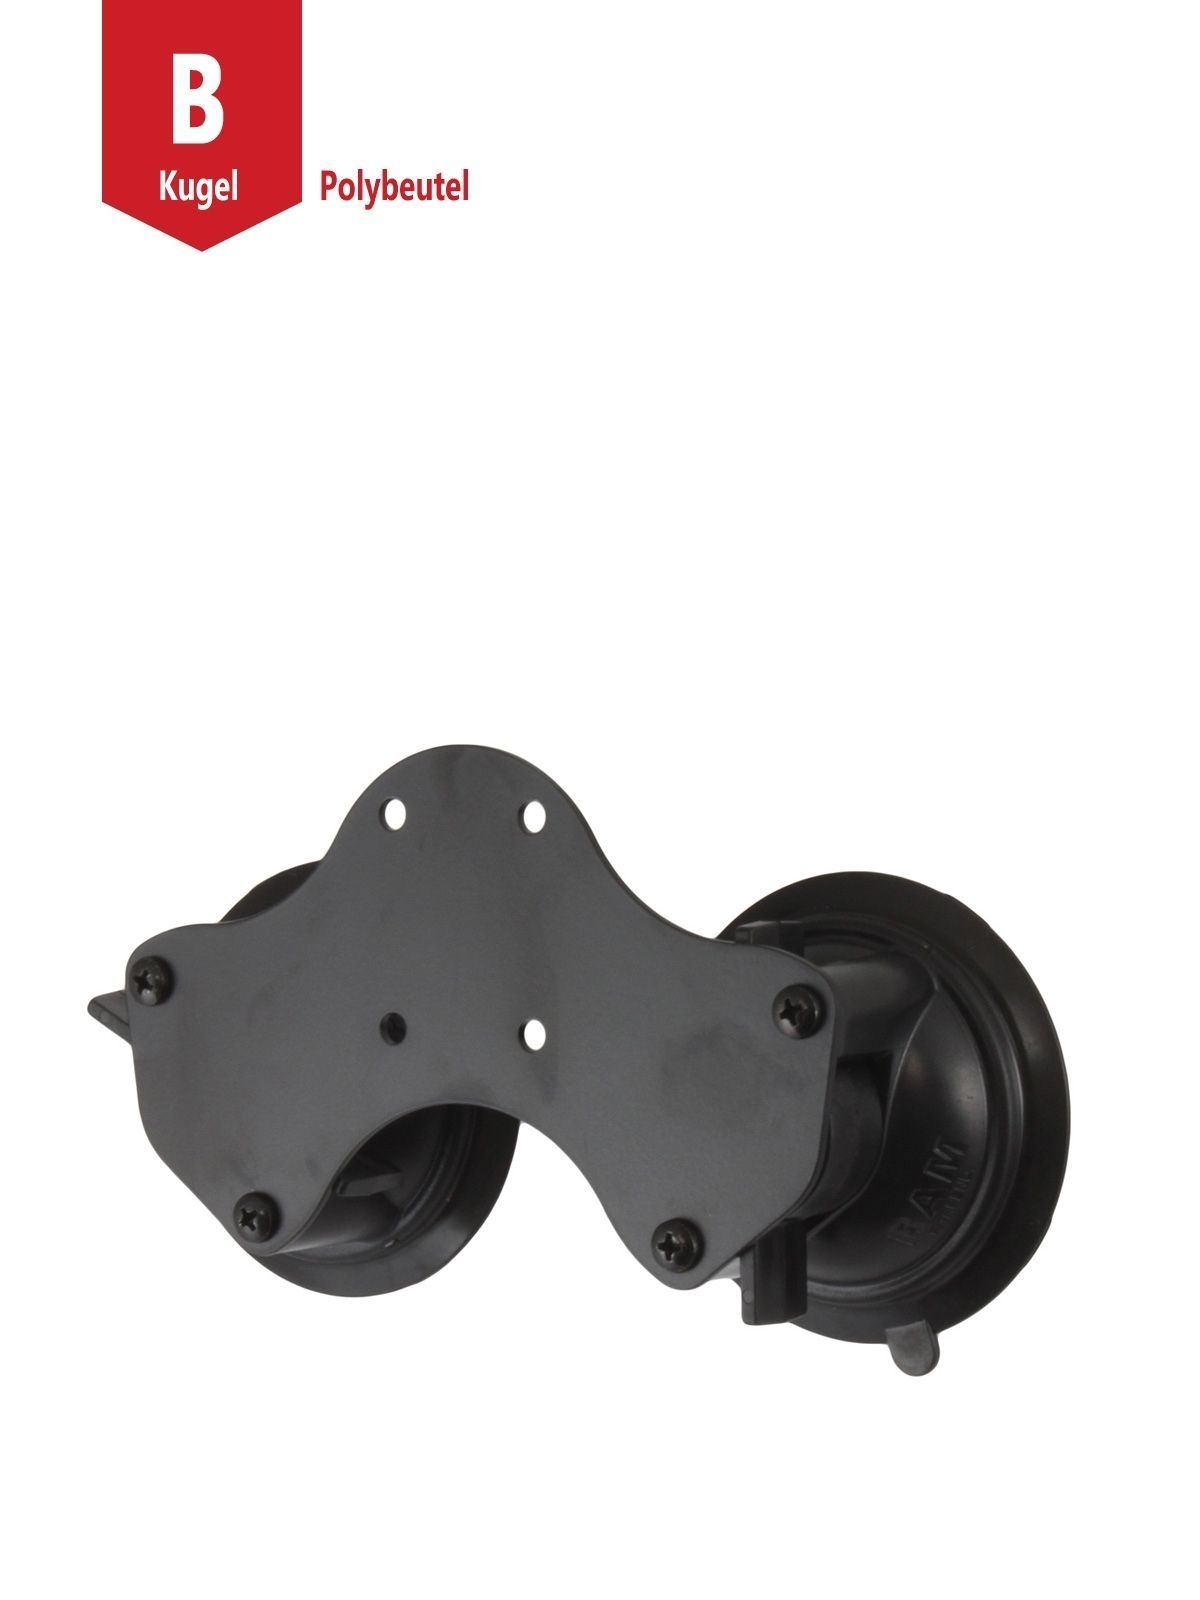 RAM MOUNTS Double Suction Cup Base with universal AMPS Hole Pattern